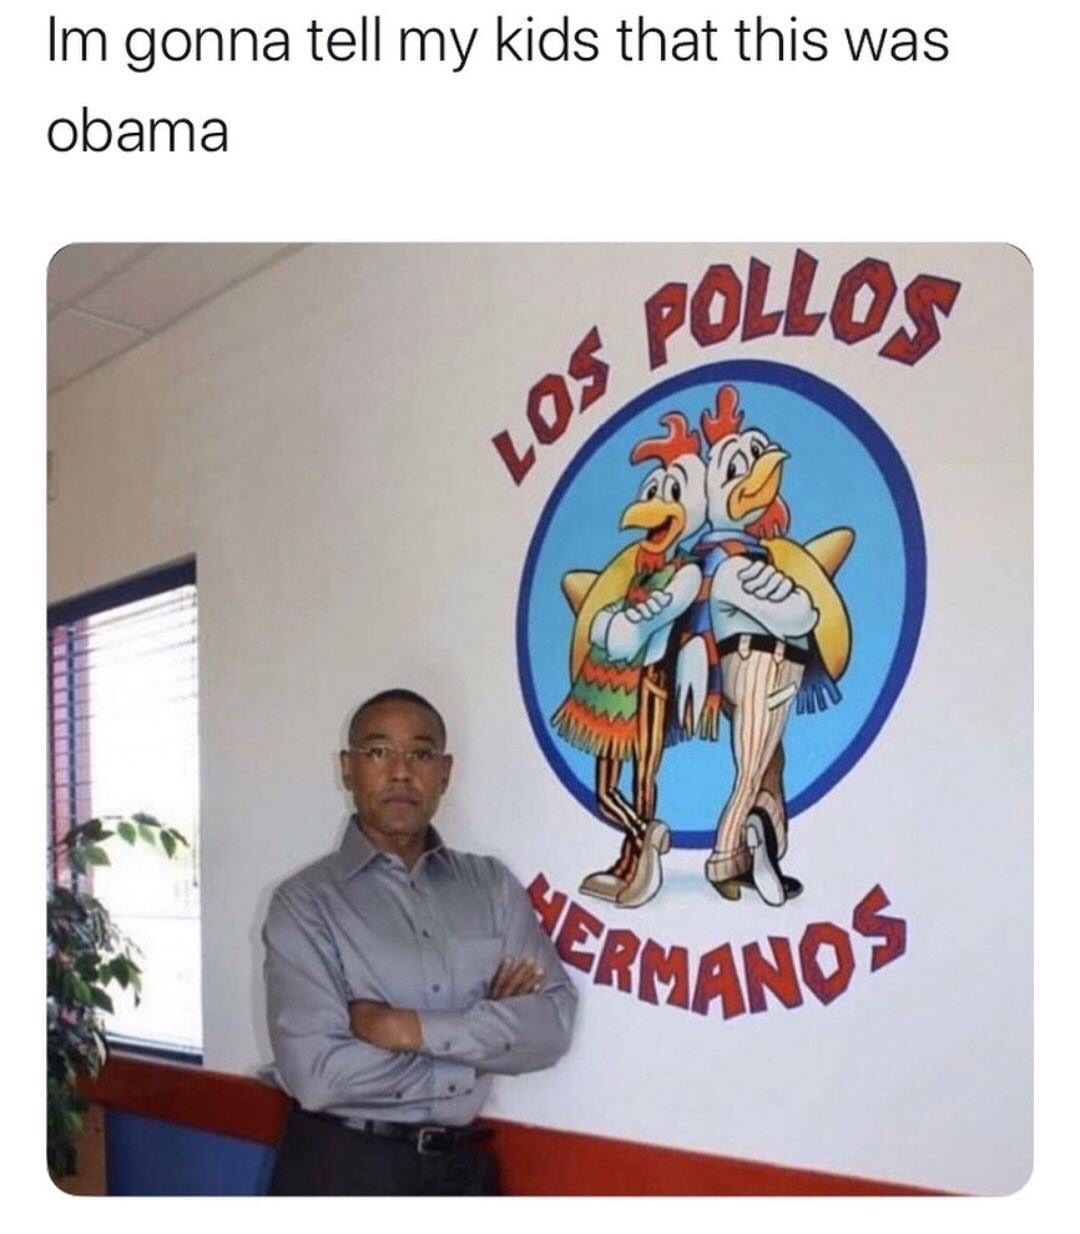 im going to tell my kids - Im gonna tell my kids that this was obama Pollos Los 90 2 Crmanos